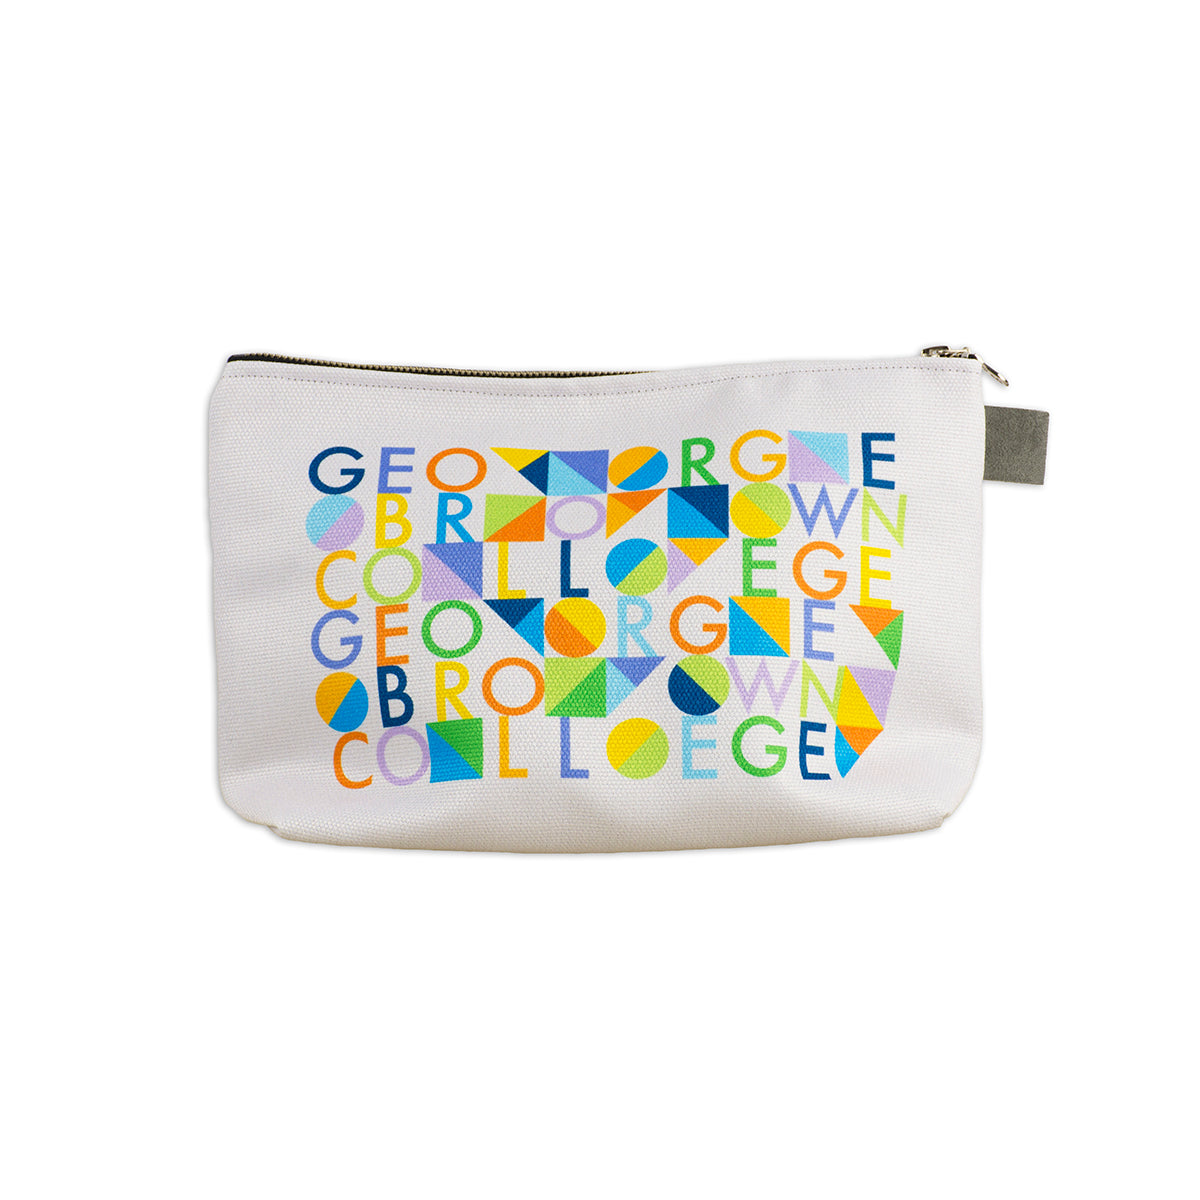 12" x 7" x 4" gusseted travel bag in white with  with multicoloured george brown college text and geometric shape pattern 